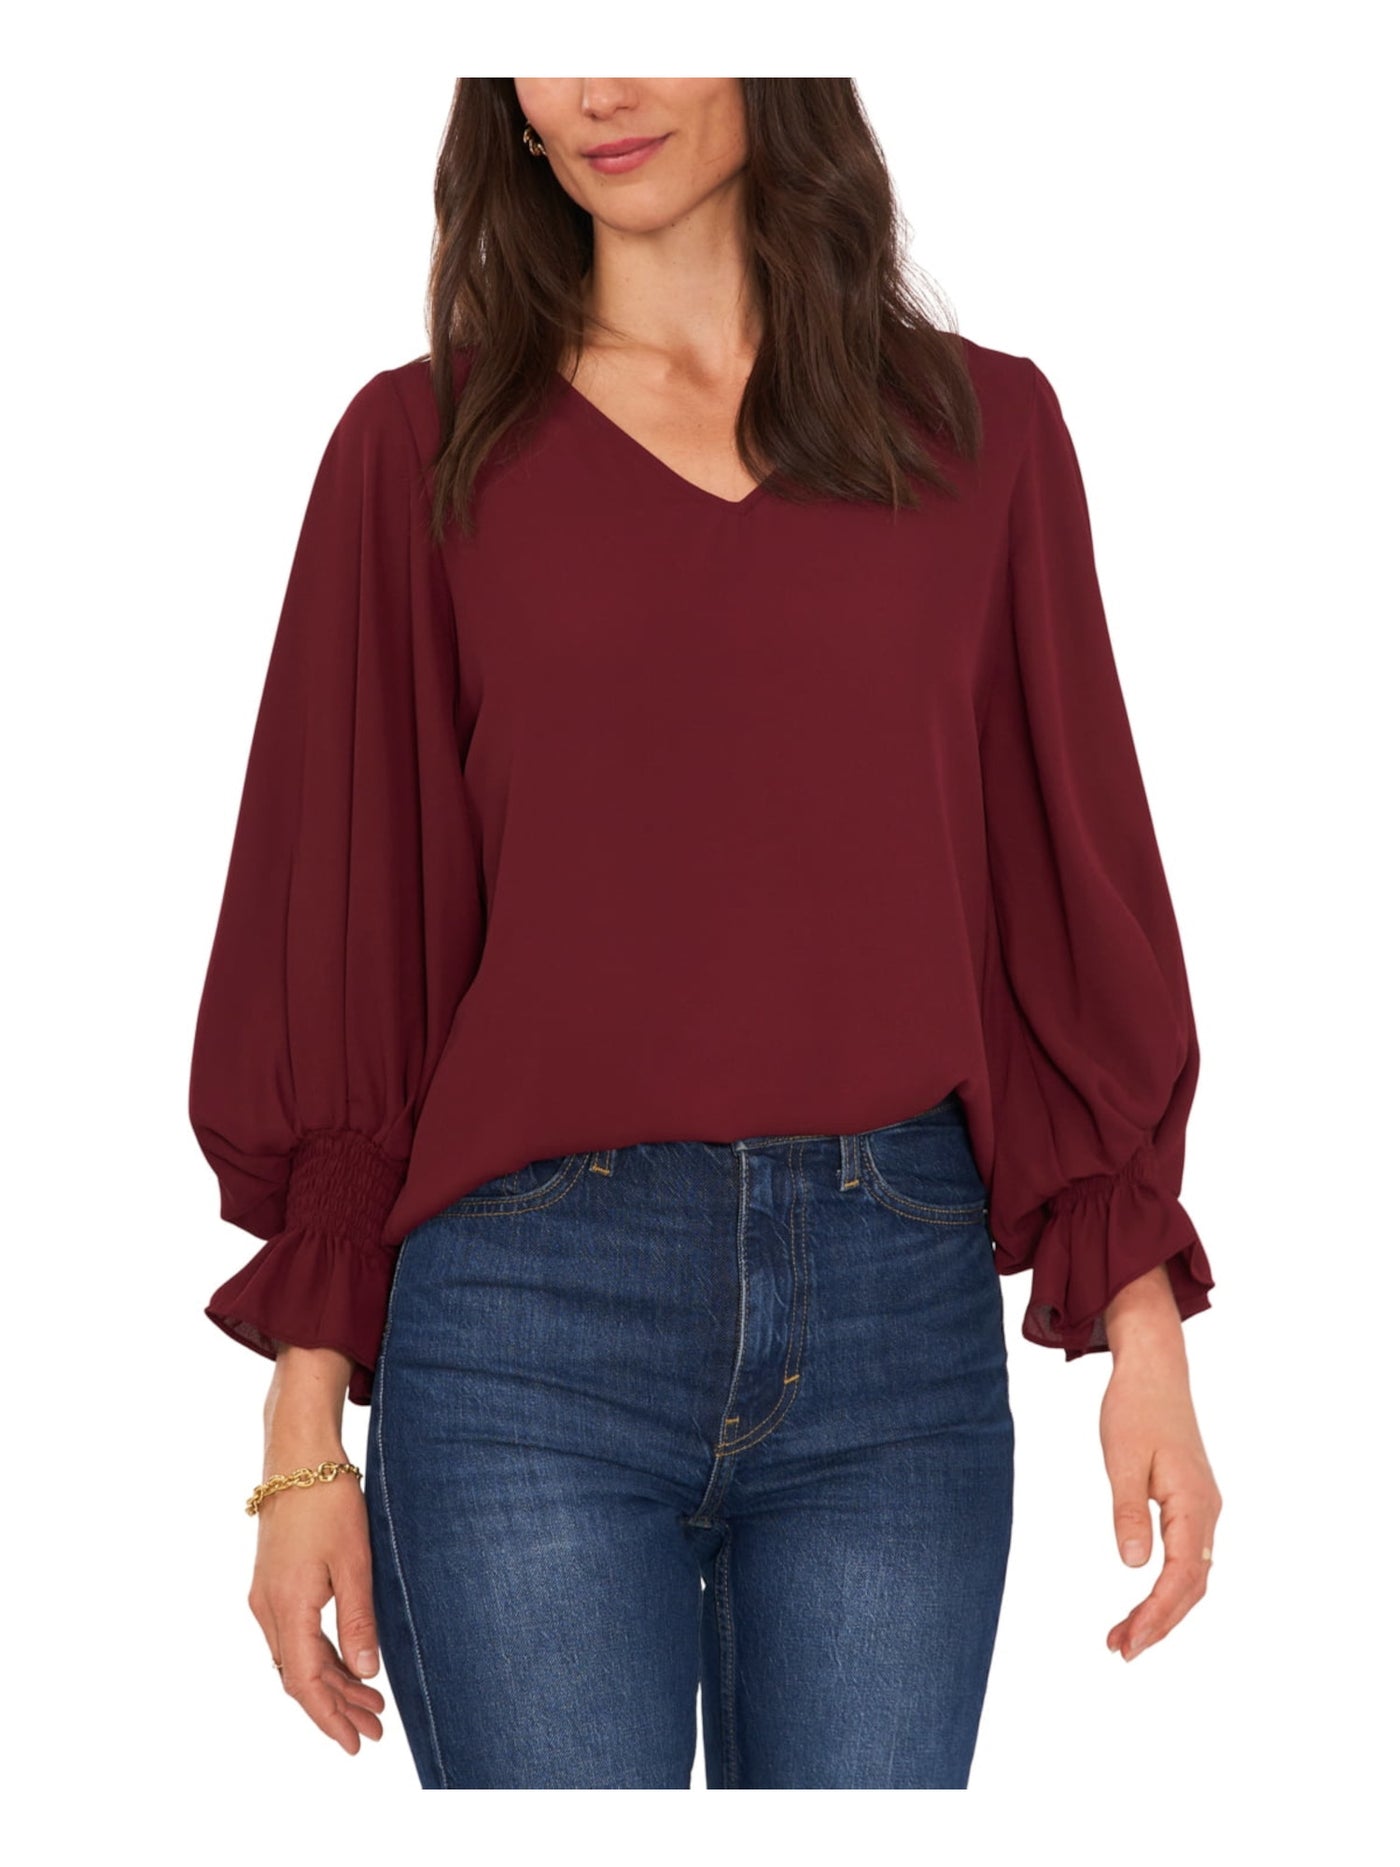 VINCE CAMUTO Womens Maroon Smocked Ruffled Loose Fit Unlined Sheer Long Sleeve V Neck Blouse XS